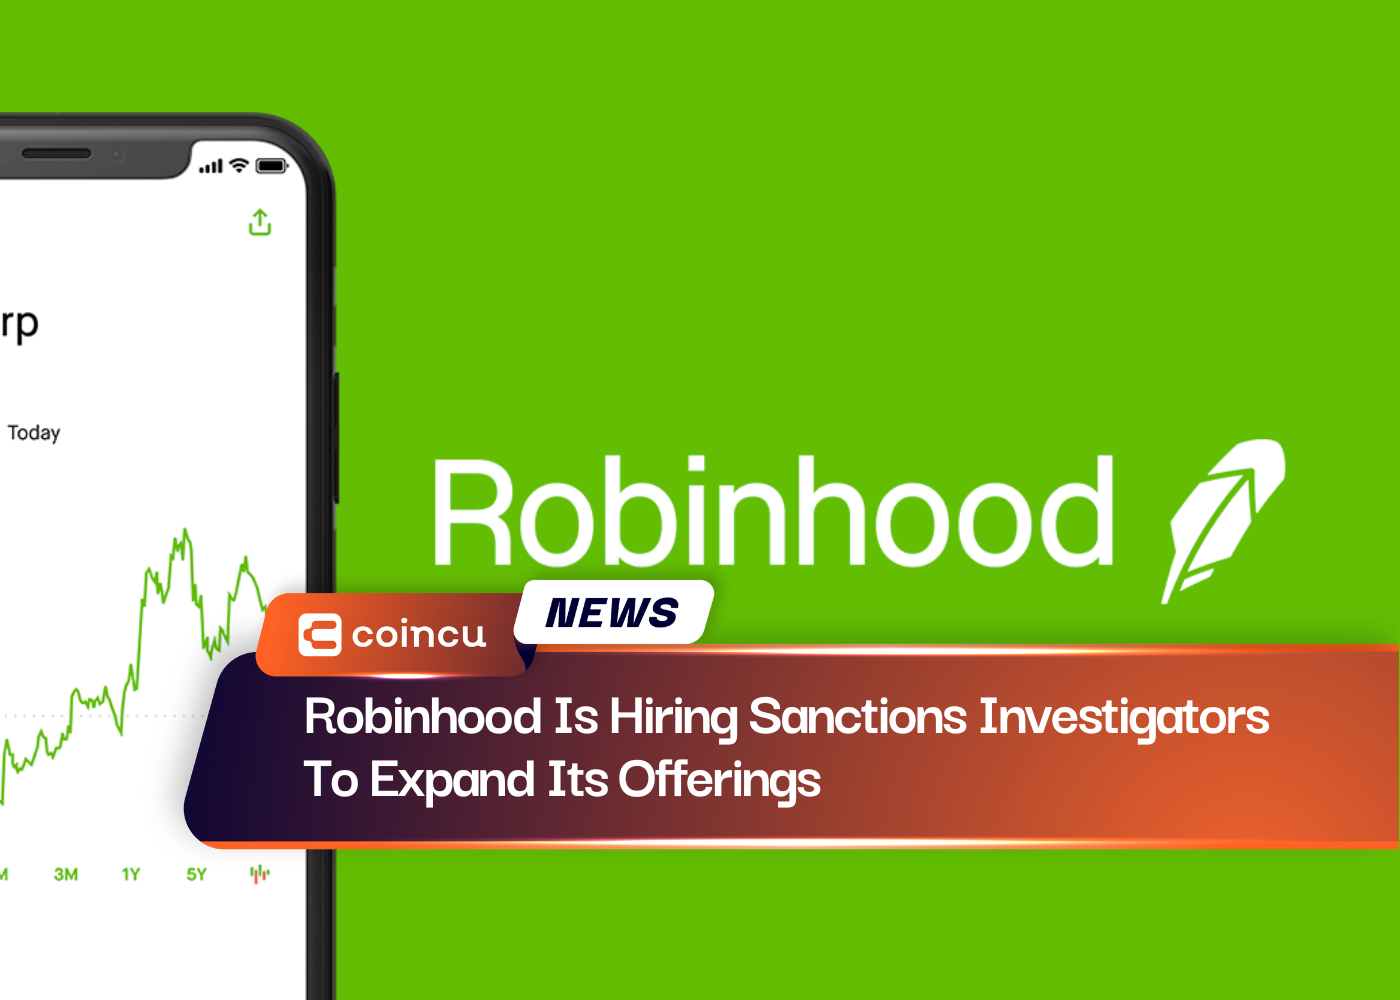 Robinhood Is Hiring Sanctions Investigators To Expand Its Offerings